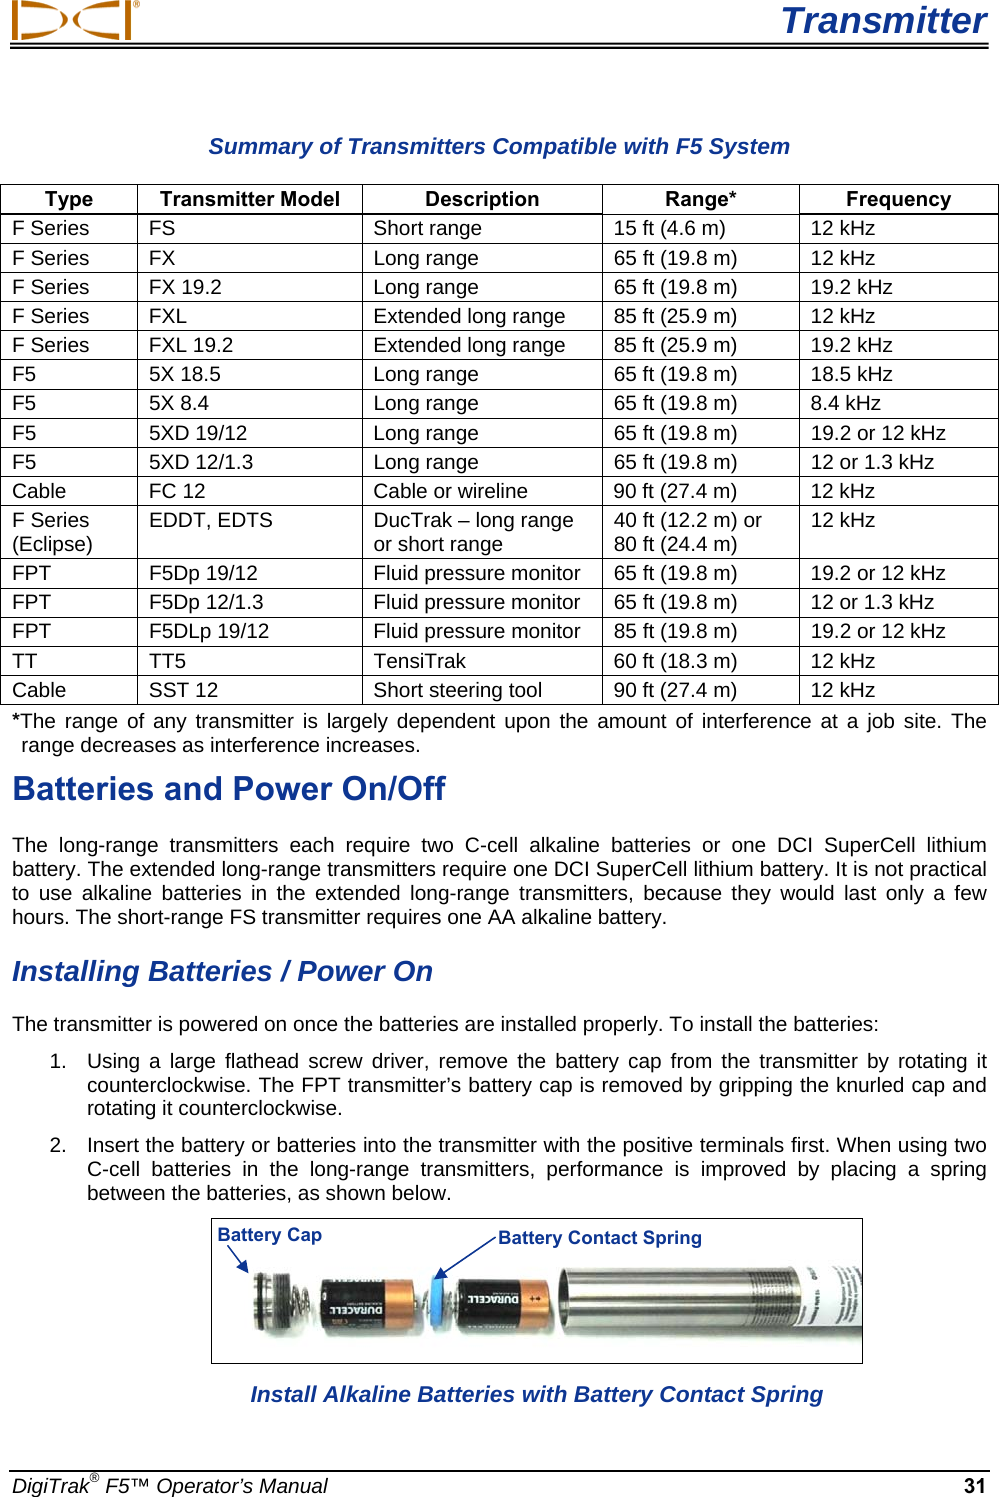  Transmitter DigiTrak® F5™ Operator’s Manual 31 Summary of Transmitters Compatible with F5 System Type Transmitter Model  Description  Range*  Frequency F Series  FS  Short range  15 ft (4.6 m)  12 kHz F Series  FX  Long range  65 ft (19.8 m)  12 kHz F Series  FX 19.2  Long range  65 ft (19.8 m)  19.2 kHz F Series  FXL  Extended long range  85 ft (25.9 m)  12 kHz F Series  FXL 19.2  Extended long range  85 ft (25.9 m)  19.2 kHz F5  5X 18.5  Long range  65 ft (19.8 m)  18.5 kHz F5  5X 8.4  Long range  65 ft (19.8 m)  8.4 kHz F5  5XD 19/12  Long range  65 ft (19.8 m)  19.2 or 12 kHz F5  5XD 12/1.3  Long range  65 ft (19.8 m)  12 or 1.3 kHz Cable  FC 12  Cable or wireline  90 ft (27.4 m)  12 kHz F Series (Eclipse)  EDDT, EDTS  DucTrak – long range or short range  40 ft (12.2 m) or 80 ft (24.4 m)  12 kHz FPT  F5Dp 19/12  Fluid pressure monitor  65 ft (19.8 m)  19.2 or 12 kHz FPT  F5Dp 12/1.3  Fluid pressure monitor  65 ft (19.8 m)  12 or 1.3 kHz FPT  F5DLp 19/12  Fluid pressure monitor  85 ft (19.8 m)  19.2 or 12 kHz TT  TT5  TensiTrak   60 ft (18.3 m)  12 kHz Cable  SST 12  Short steering tool  90 ft (27.4 m)  12 kHz *The range of any transmitter is largely dependent upon the amount of interference at a job site. The range decreases as interference increases. Batteries and Power On/Off The long-range transmitters each require two C-cell alkaline batteries or one DCI SuperCell lithium battery. The extended long-range transmitters require one DCI SuperCell lithium battery. It is not practical to use alkaline batteries in the extended long-range transmitters, because they would last only a few hours. The short-range FS transmitter requires one AA alkaline battery. Installing Batteries / Power On The transmitter is powered on once the batteries are installed properly. To install the batteries: 1.  Using a large flathead screw driver, remove the battery cap from the transmitter by rotating it counterclockwise. The FPT transmitter’s battery cap is removed by gripping the knurled cap and rotating it counterclockwise. 2.  Insert the battery or batteries into the transmitter with the positive terminals first. When using two C-cell batteries in the long-range transmitters, performance is improved by placing a spring between the batteries, as shown below.  Install Alkaline Batteries with Battery Contact Spring Battery Contact SpringBattery Cap 